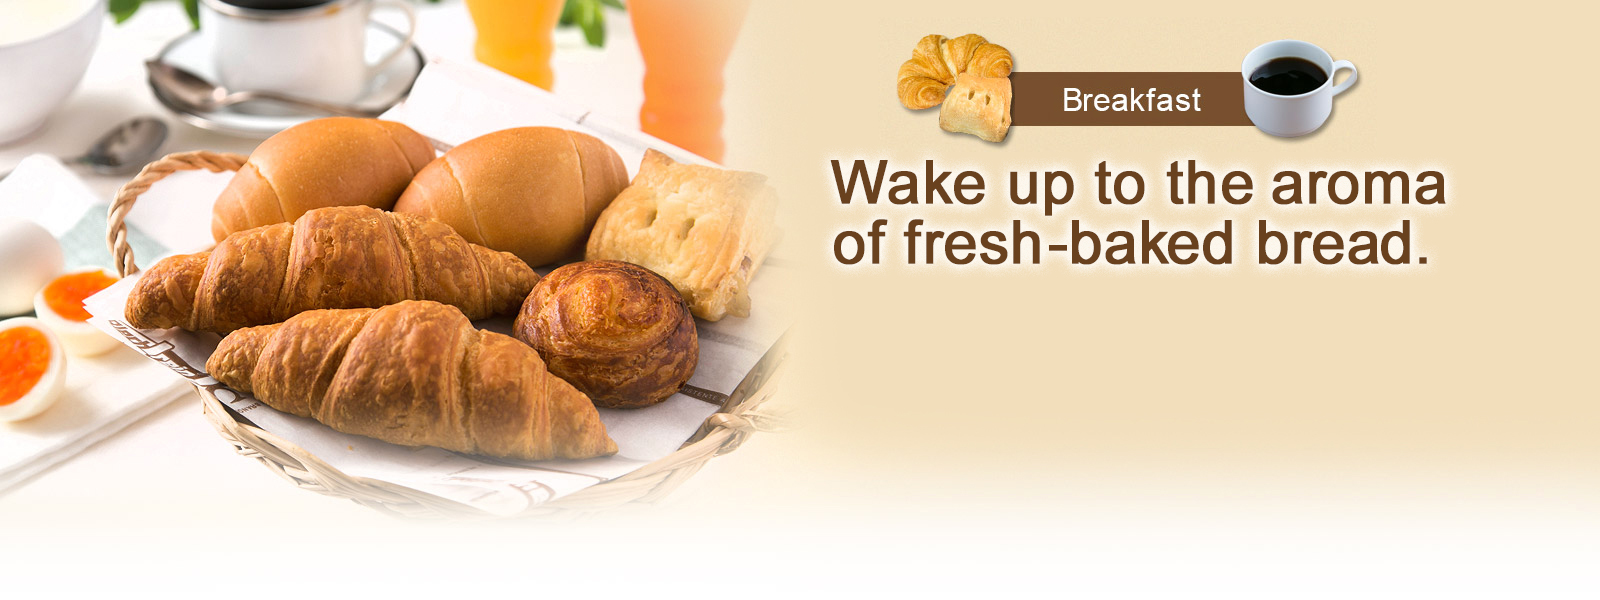 Wake up to the aroma of fresh-baked bread.